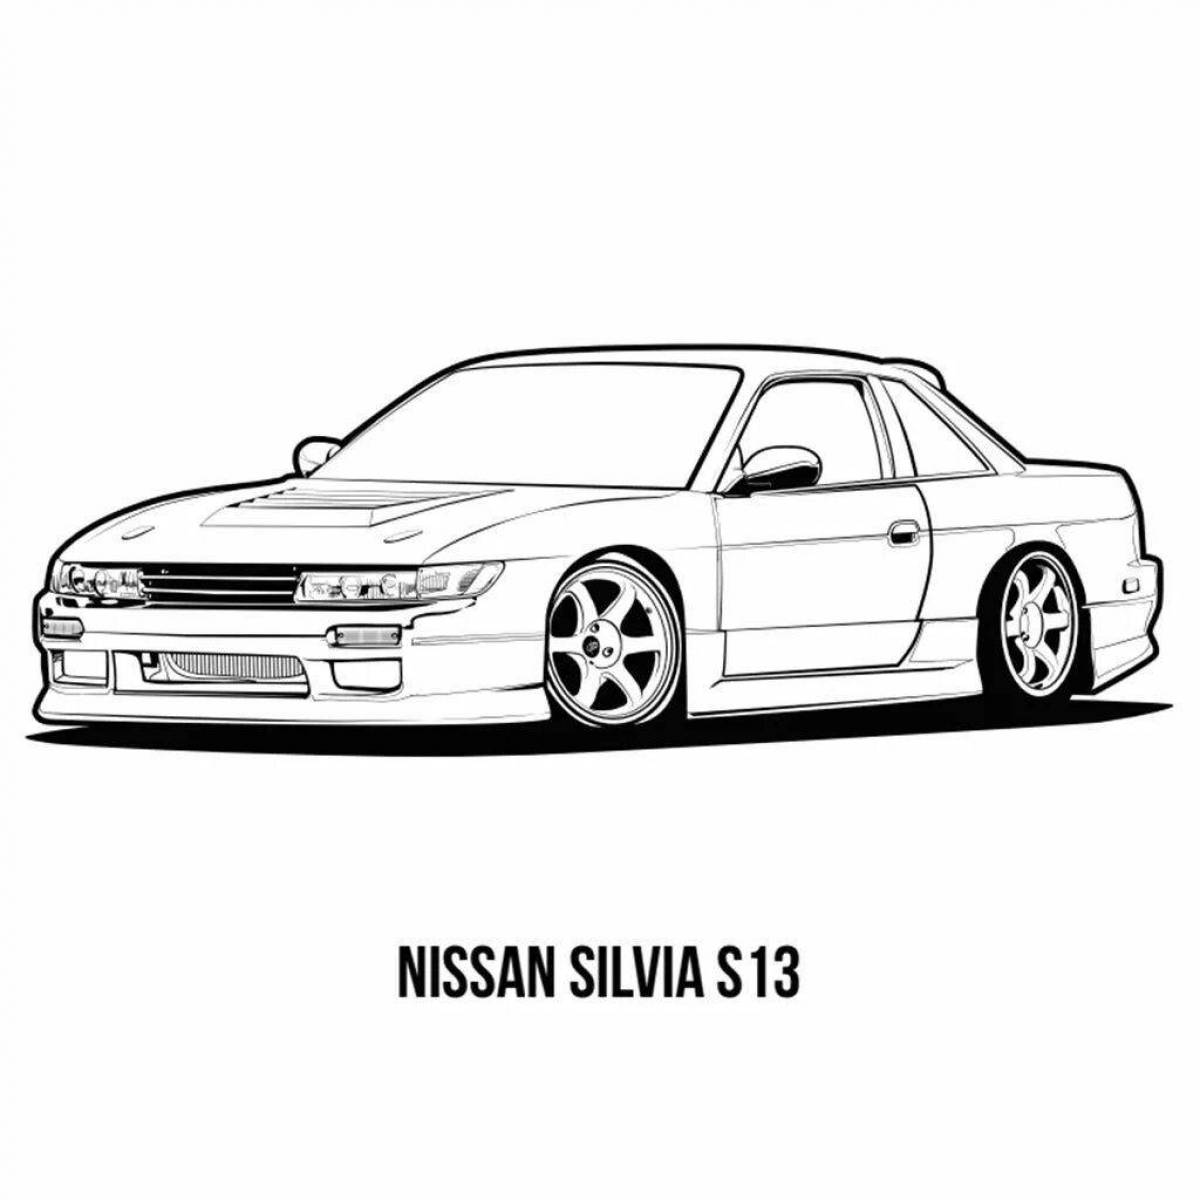 Dynamic nissan skyline from fast and furious 2